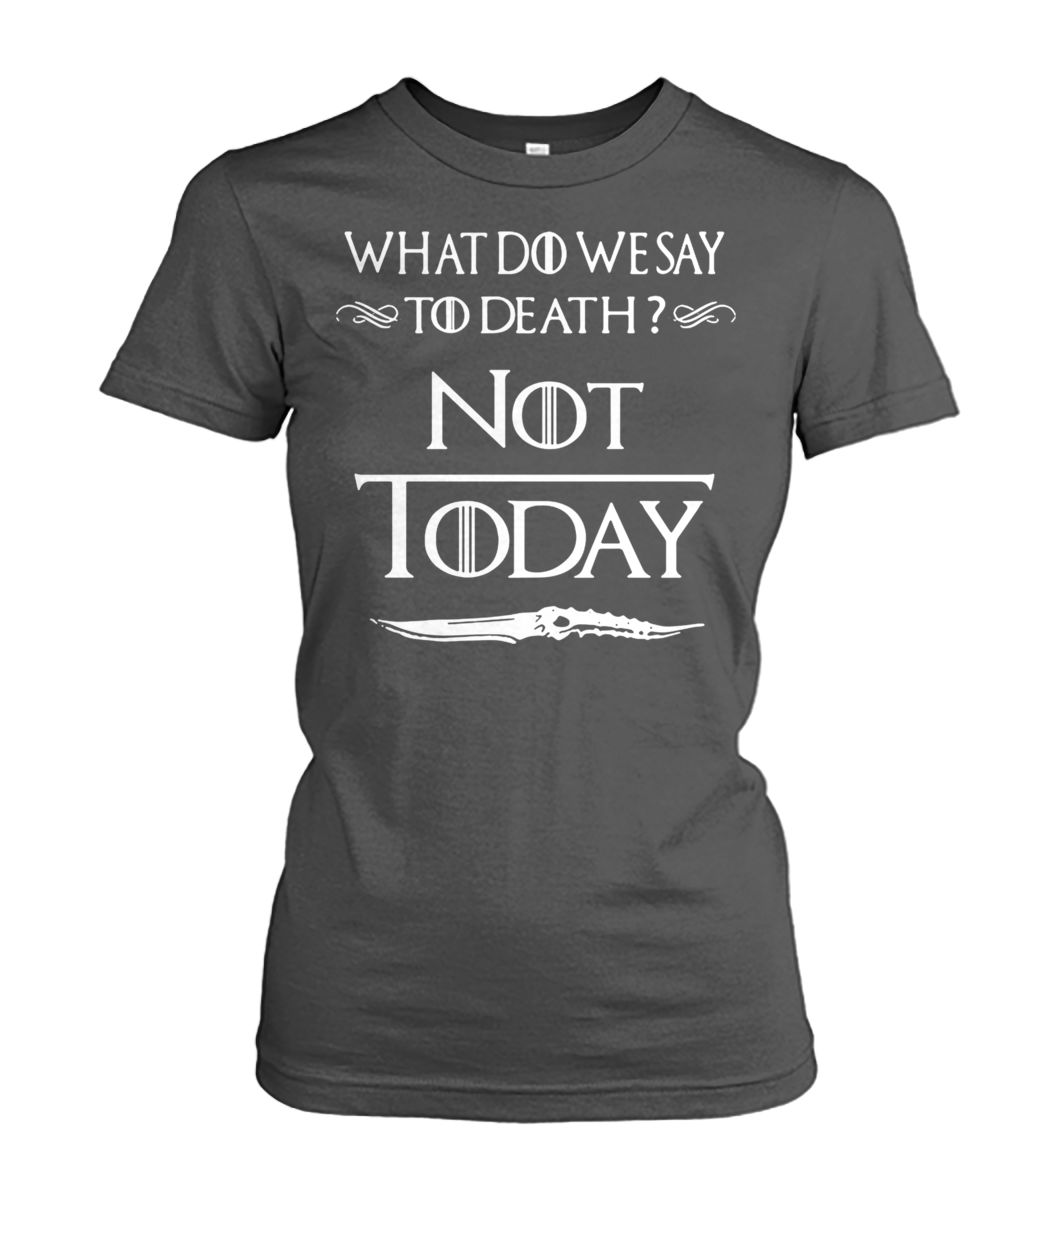 Game of thrones what do we say to death not today women's crew tee